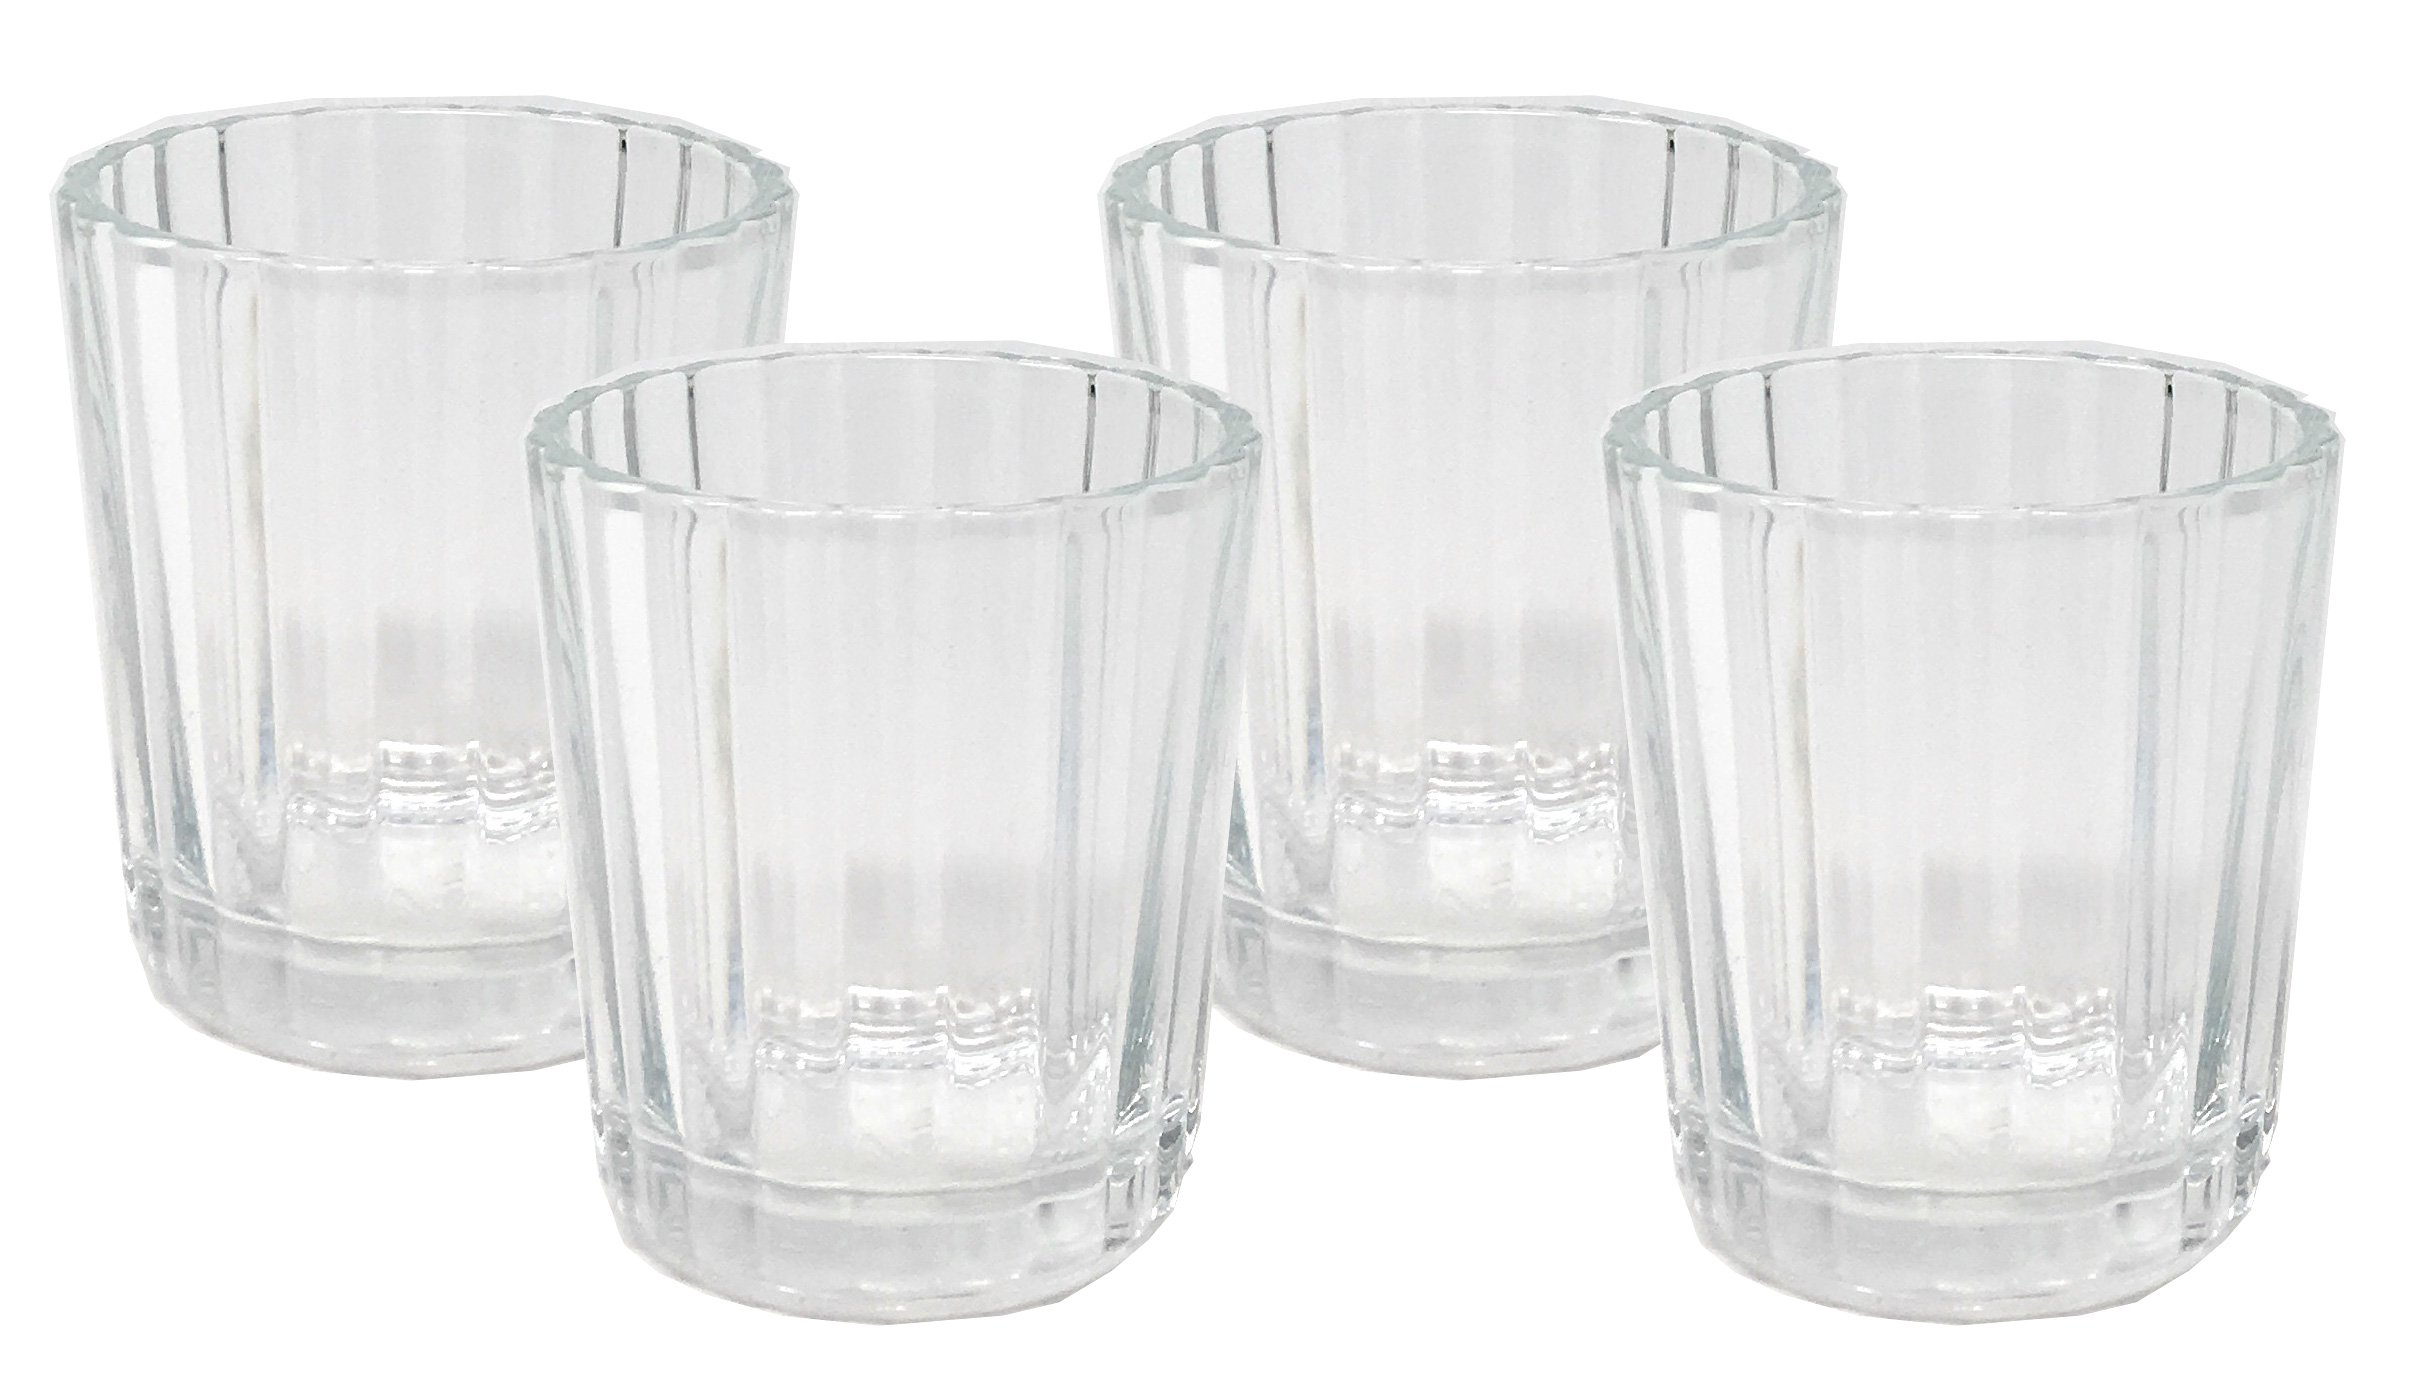 The Curated Pantry Vaso Veladora Mezcal Glasses from Mexico (Pack of 4)